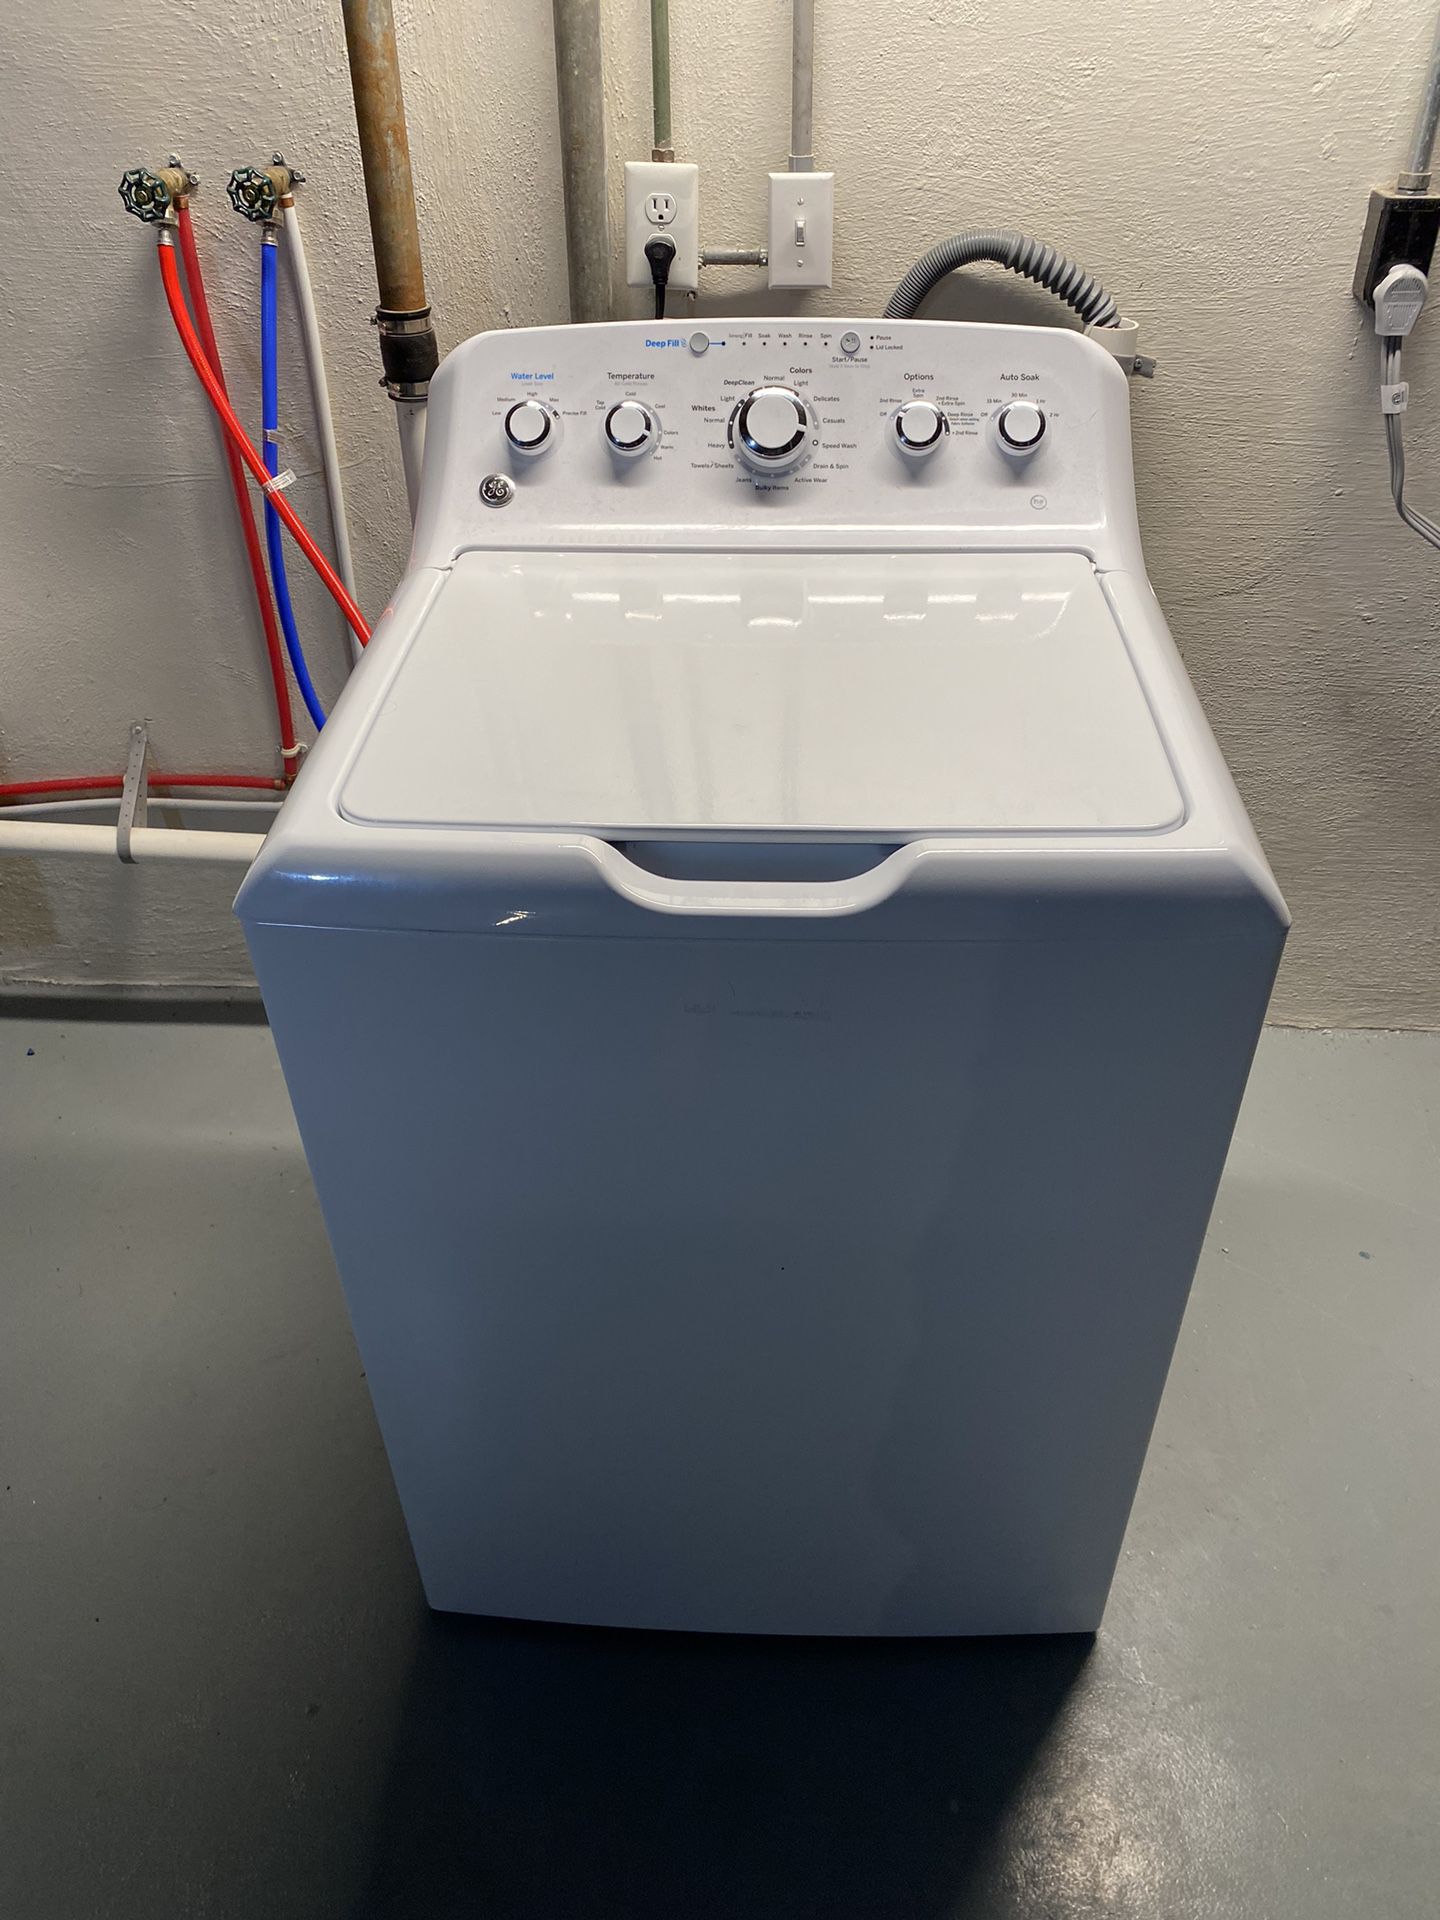 GE washer And Dryer